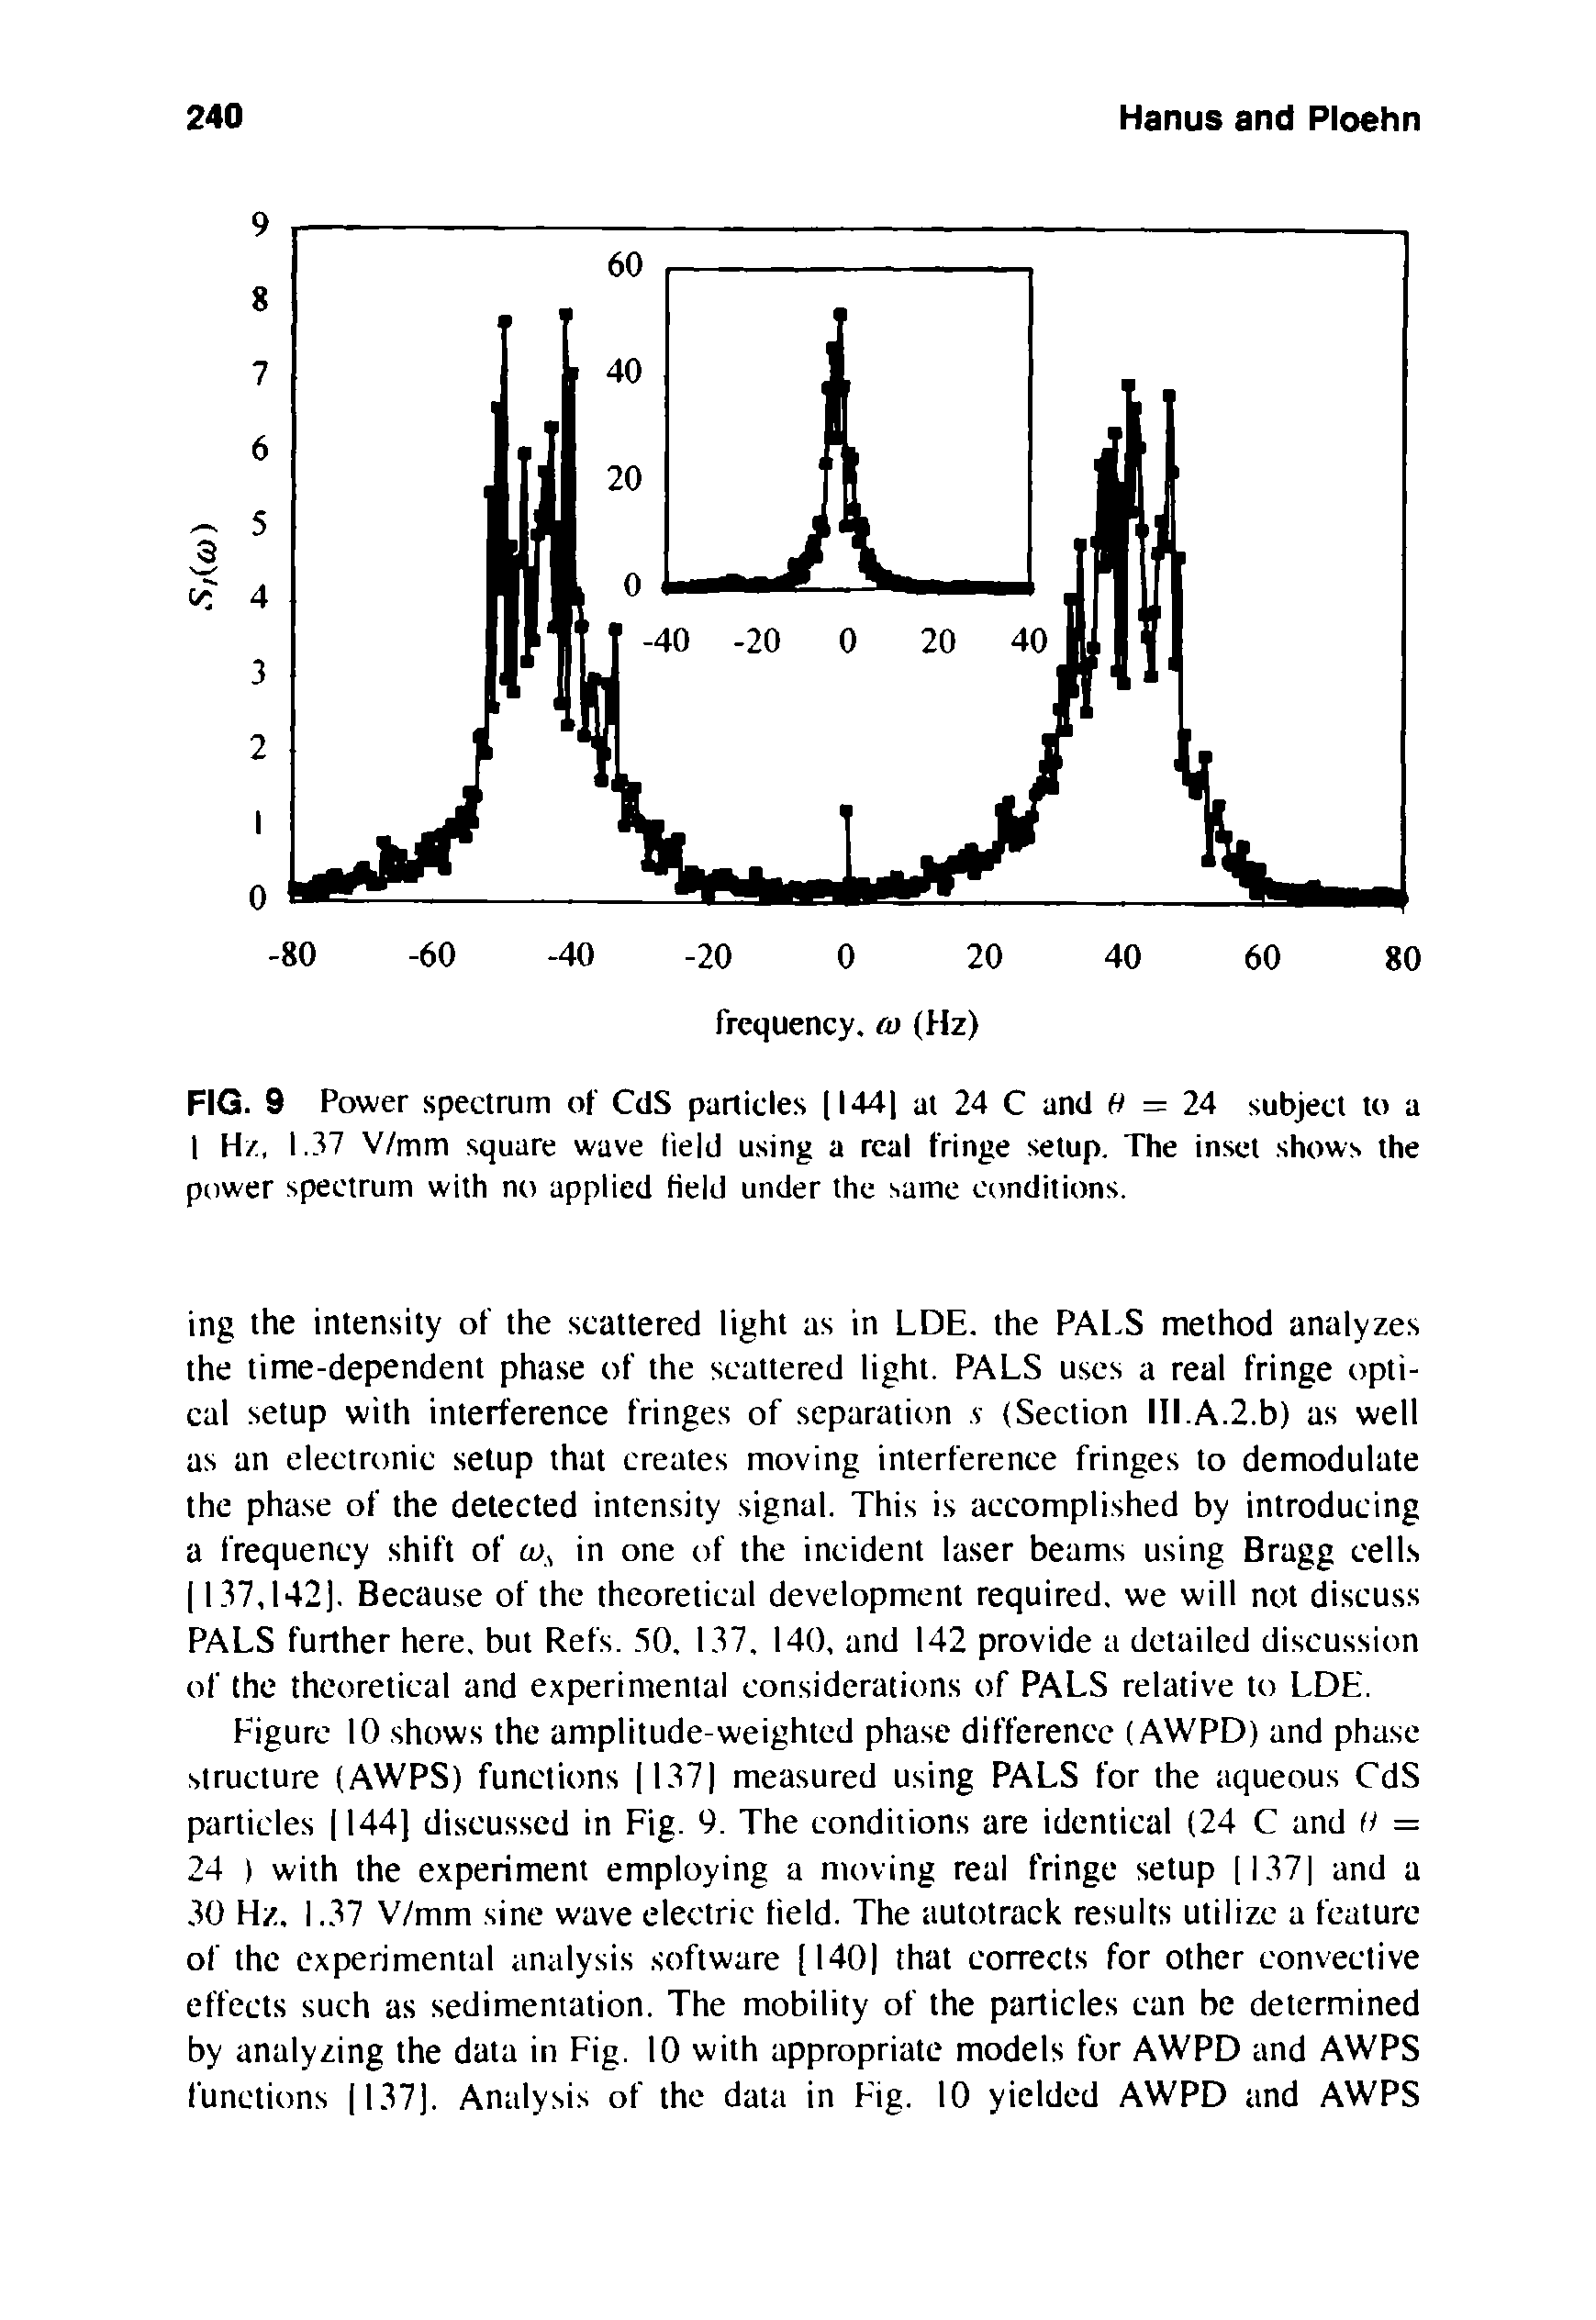 Figure 10 shows the amplitude-weighted phase difference (AWPD) and phase structure (AWPS) functions 1.37 measured using PALS for the aqueous CdS particles (144] discussed in Fig. 9. The conditions are identical (24 C and u = 24 ) with the experiment employing a moving real fringe setup [1.37] and a. 30 Hz, 1.37 V/mm sine wave electric field. The autotrack results utilize a feature of the experimental analysis software [140] that corrects for other convective effects such as sedimentation. The mobility of the particles can be determined by analyzing the data in Fig. 10 with appropriate models for AWPD and AWPS functions (137], Analysis of the data in Fig. 10 yielded AWPD and AWPS...